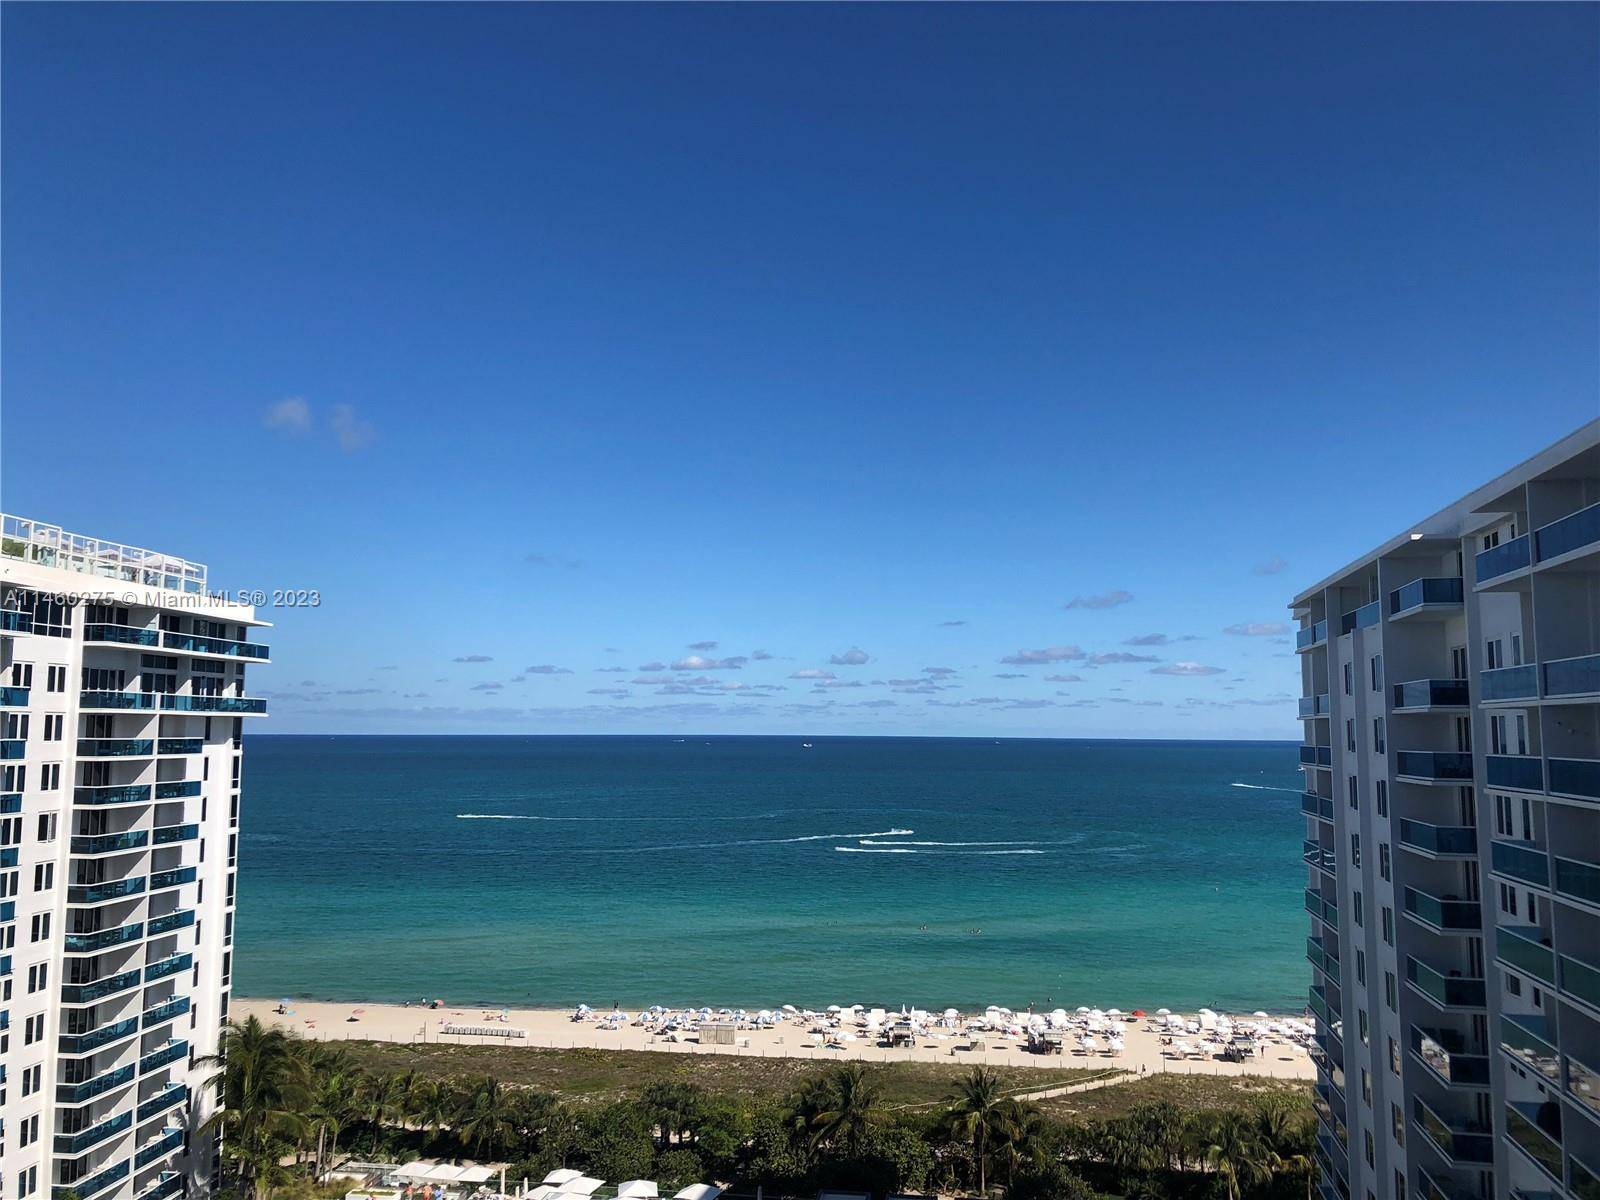 DIRECT EAST OCEANFRONT RESORT CONDOMINIUM THAT SHARES SOME OF THE AMENITIES WITH THE 1 HOTEL SOUTH BEACH, THIS LOVELY 1 BEDROOM 1 BATH COMES FURNISHED WITH UTILITIES INCLUDED FIBER OPTICS ...